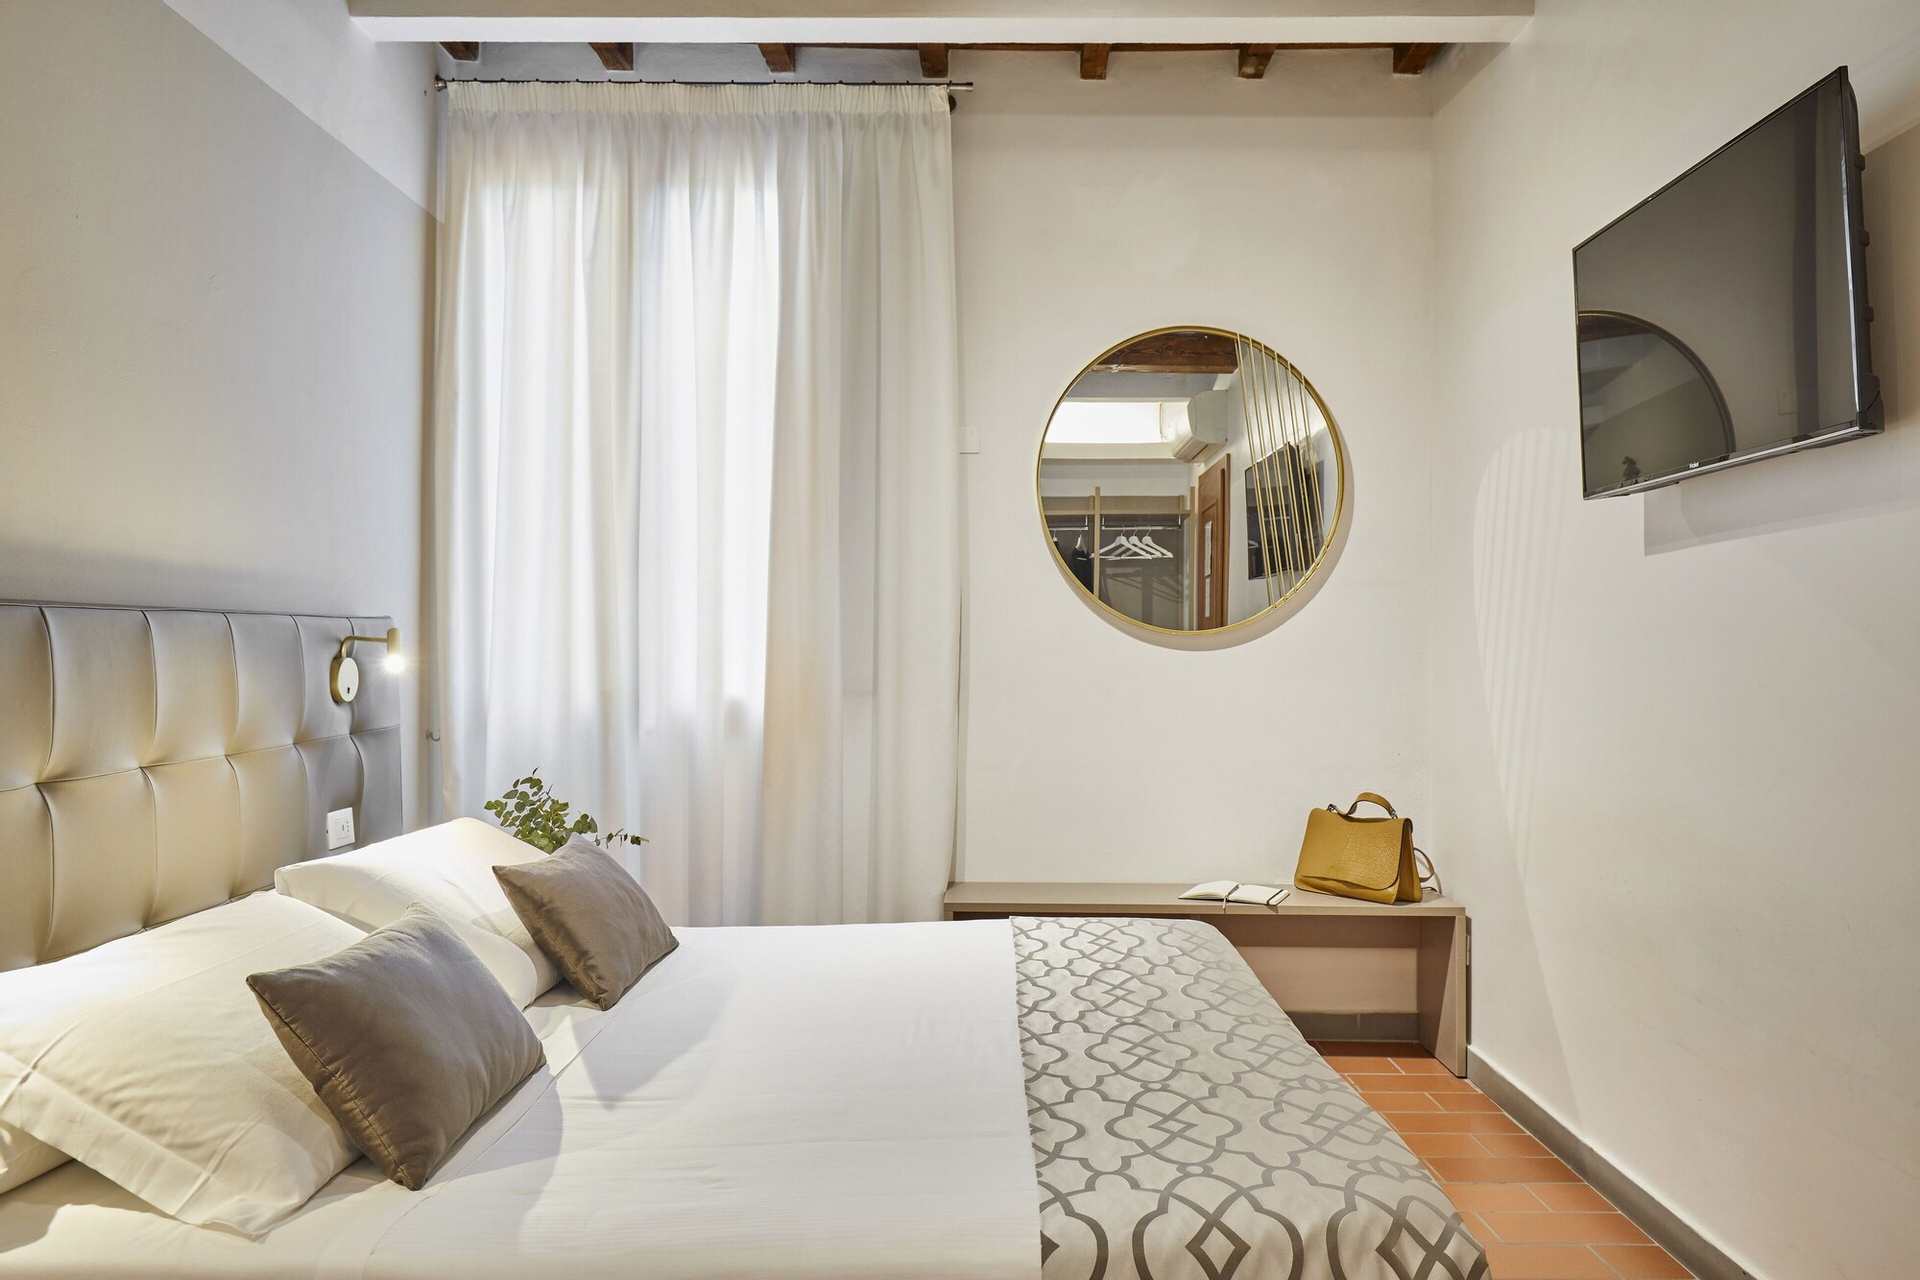 Sette Angeli Rooms, Florence